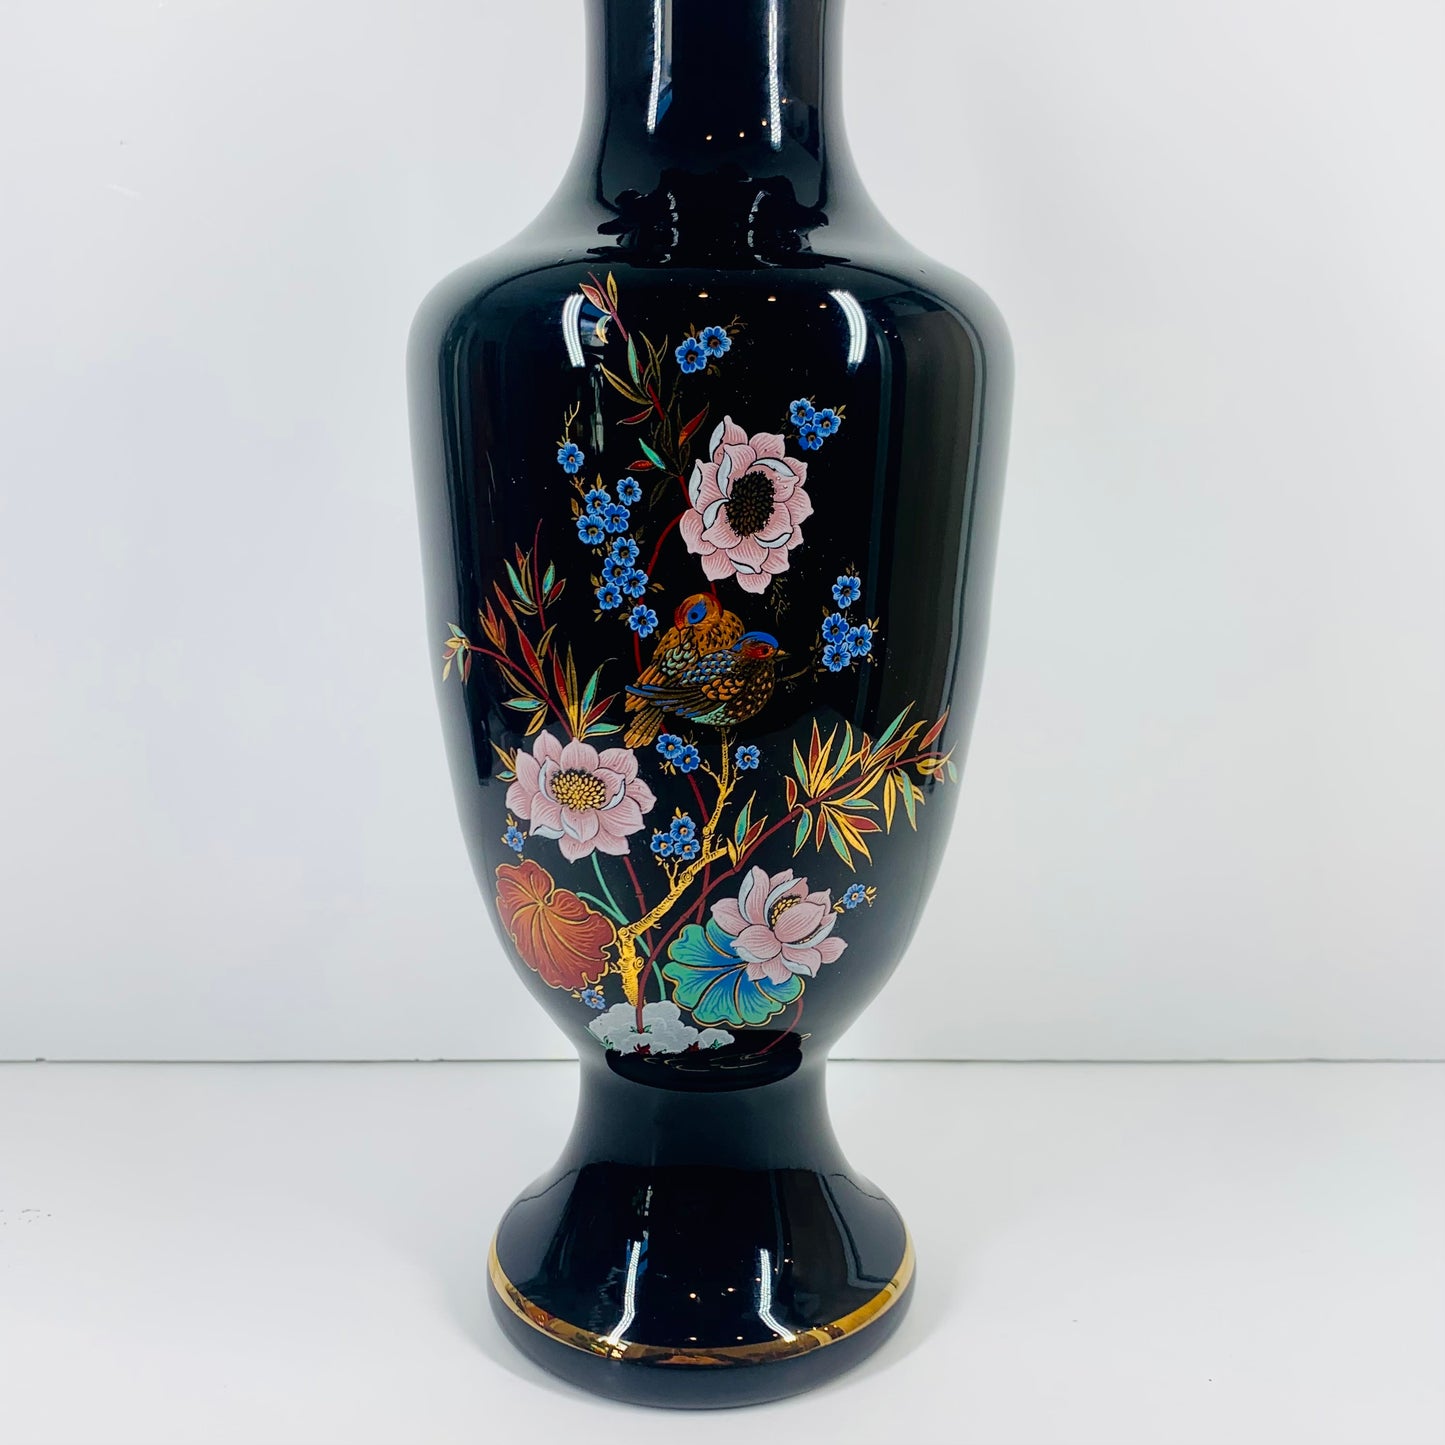 Vintage hand painted Murano black glass vase with ruffle rim